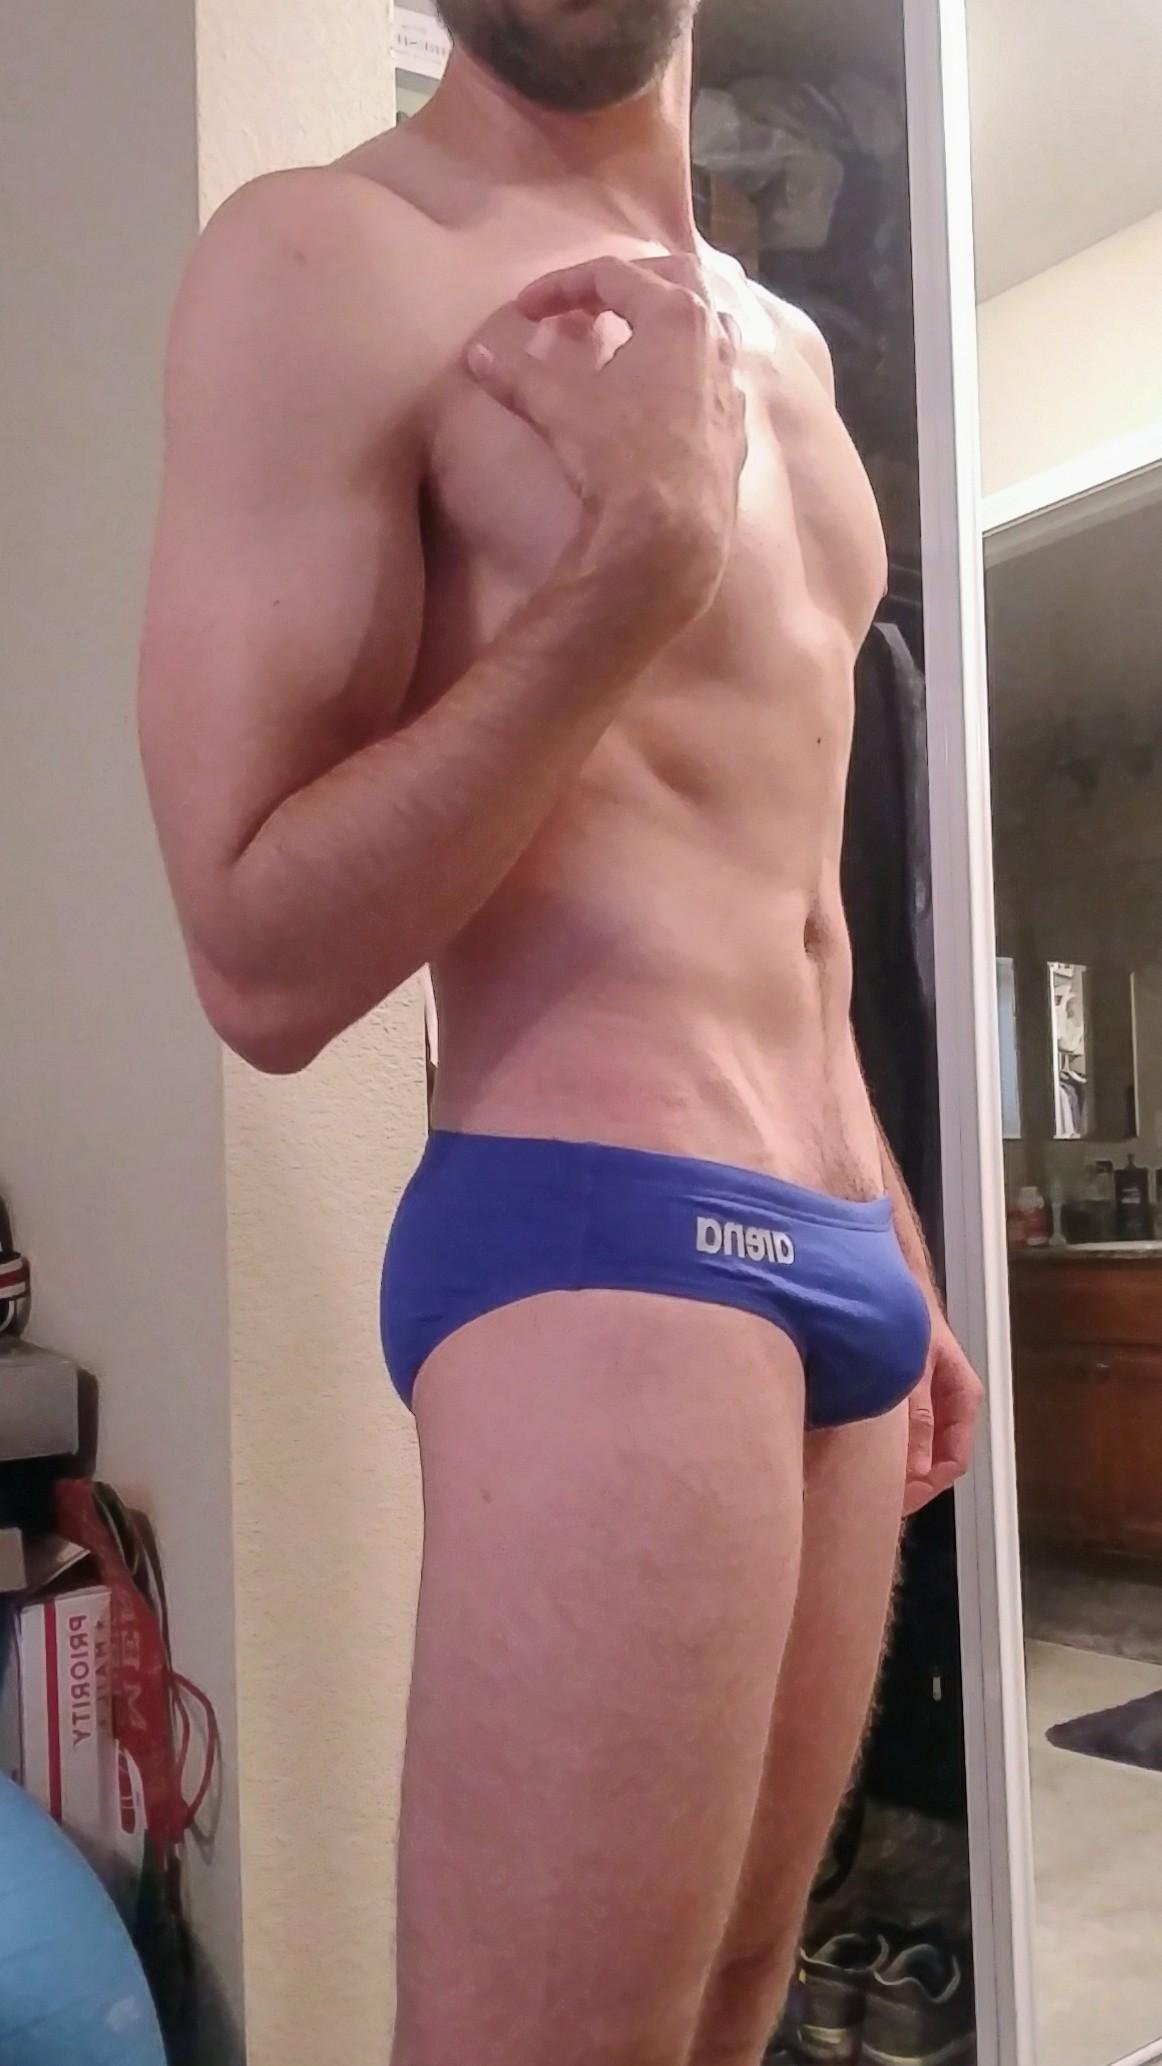 I know they're controversial, but I love wearing speedos sometimes. Thoughts?